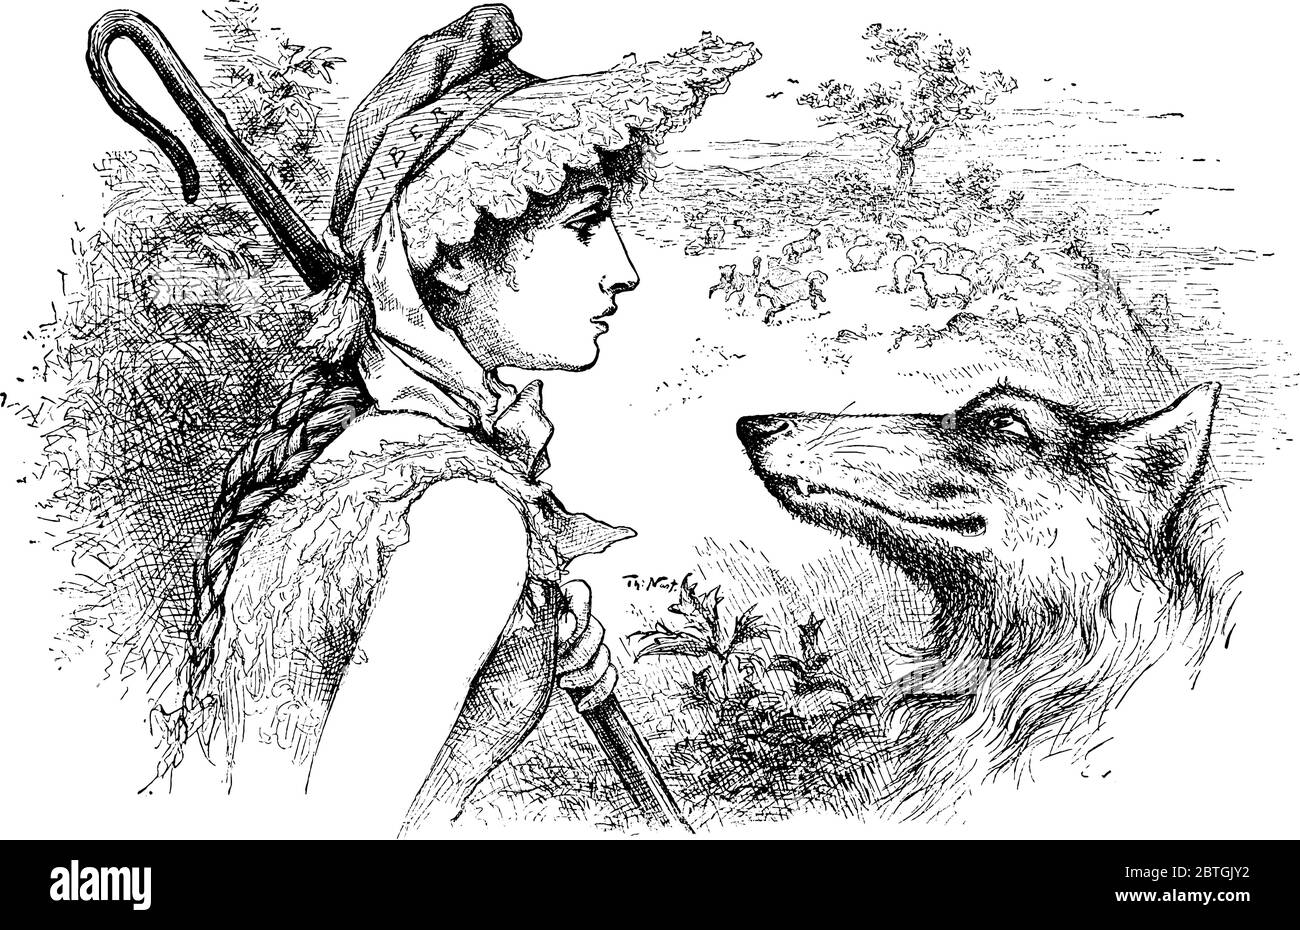 Caricature of Girl wearing Shepherd costume and wolf, wolf represent Democratic party During the 1884 Presidential Election, vintage line drawing or e Stock Vector